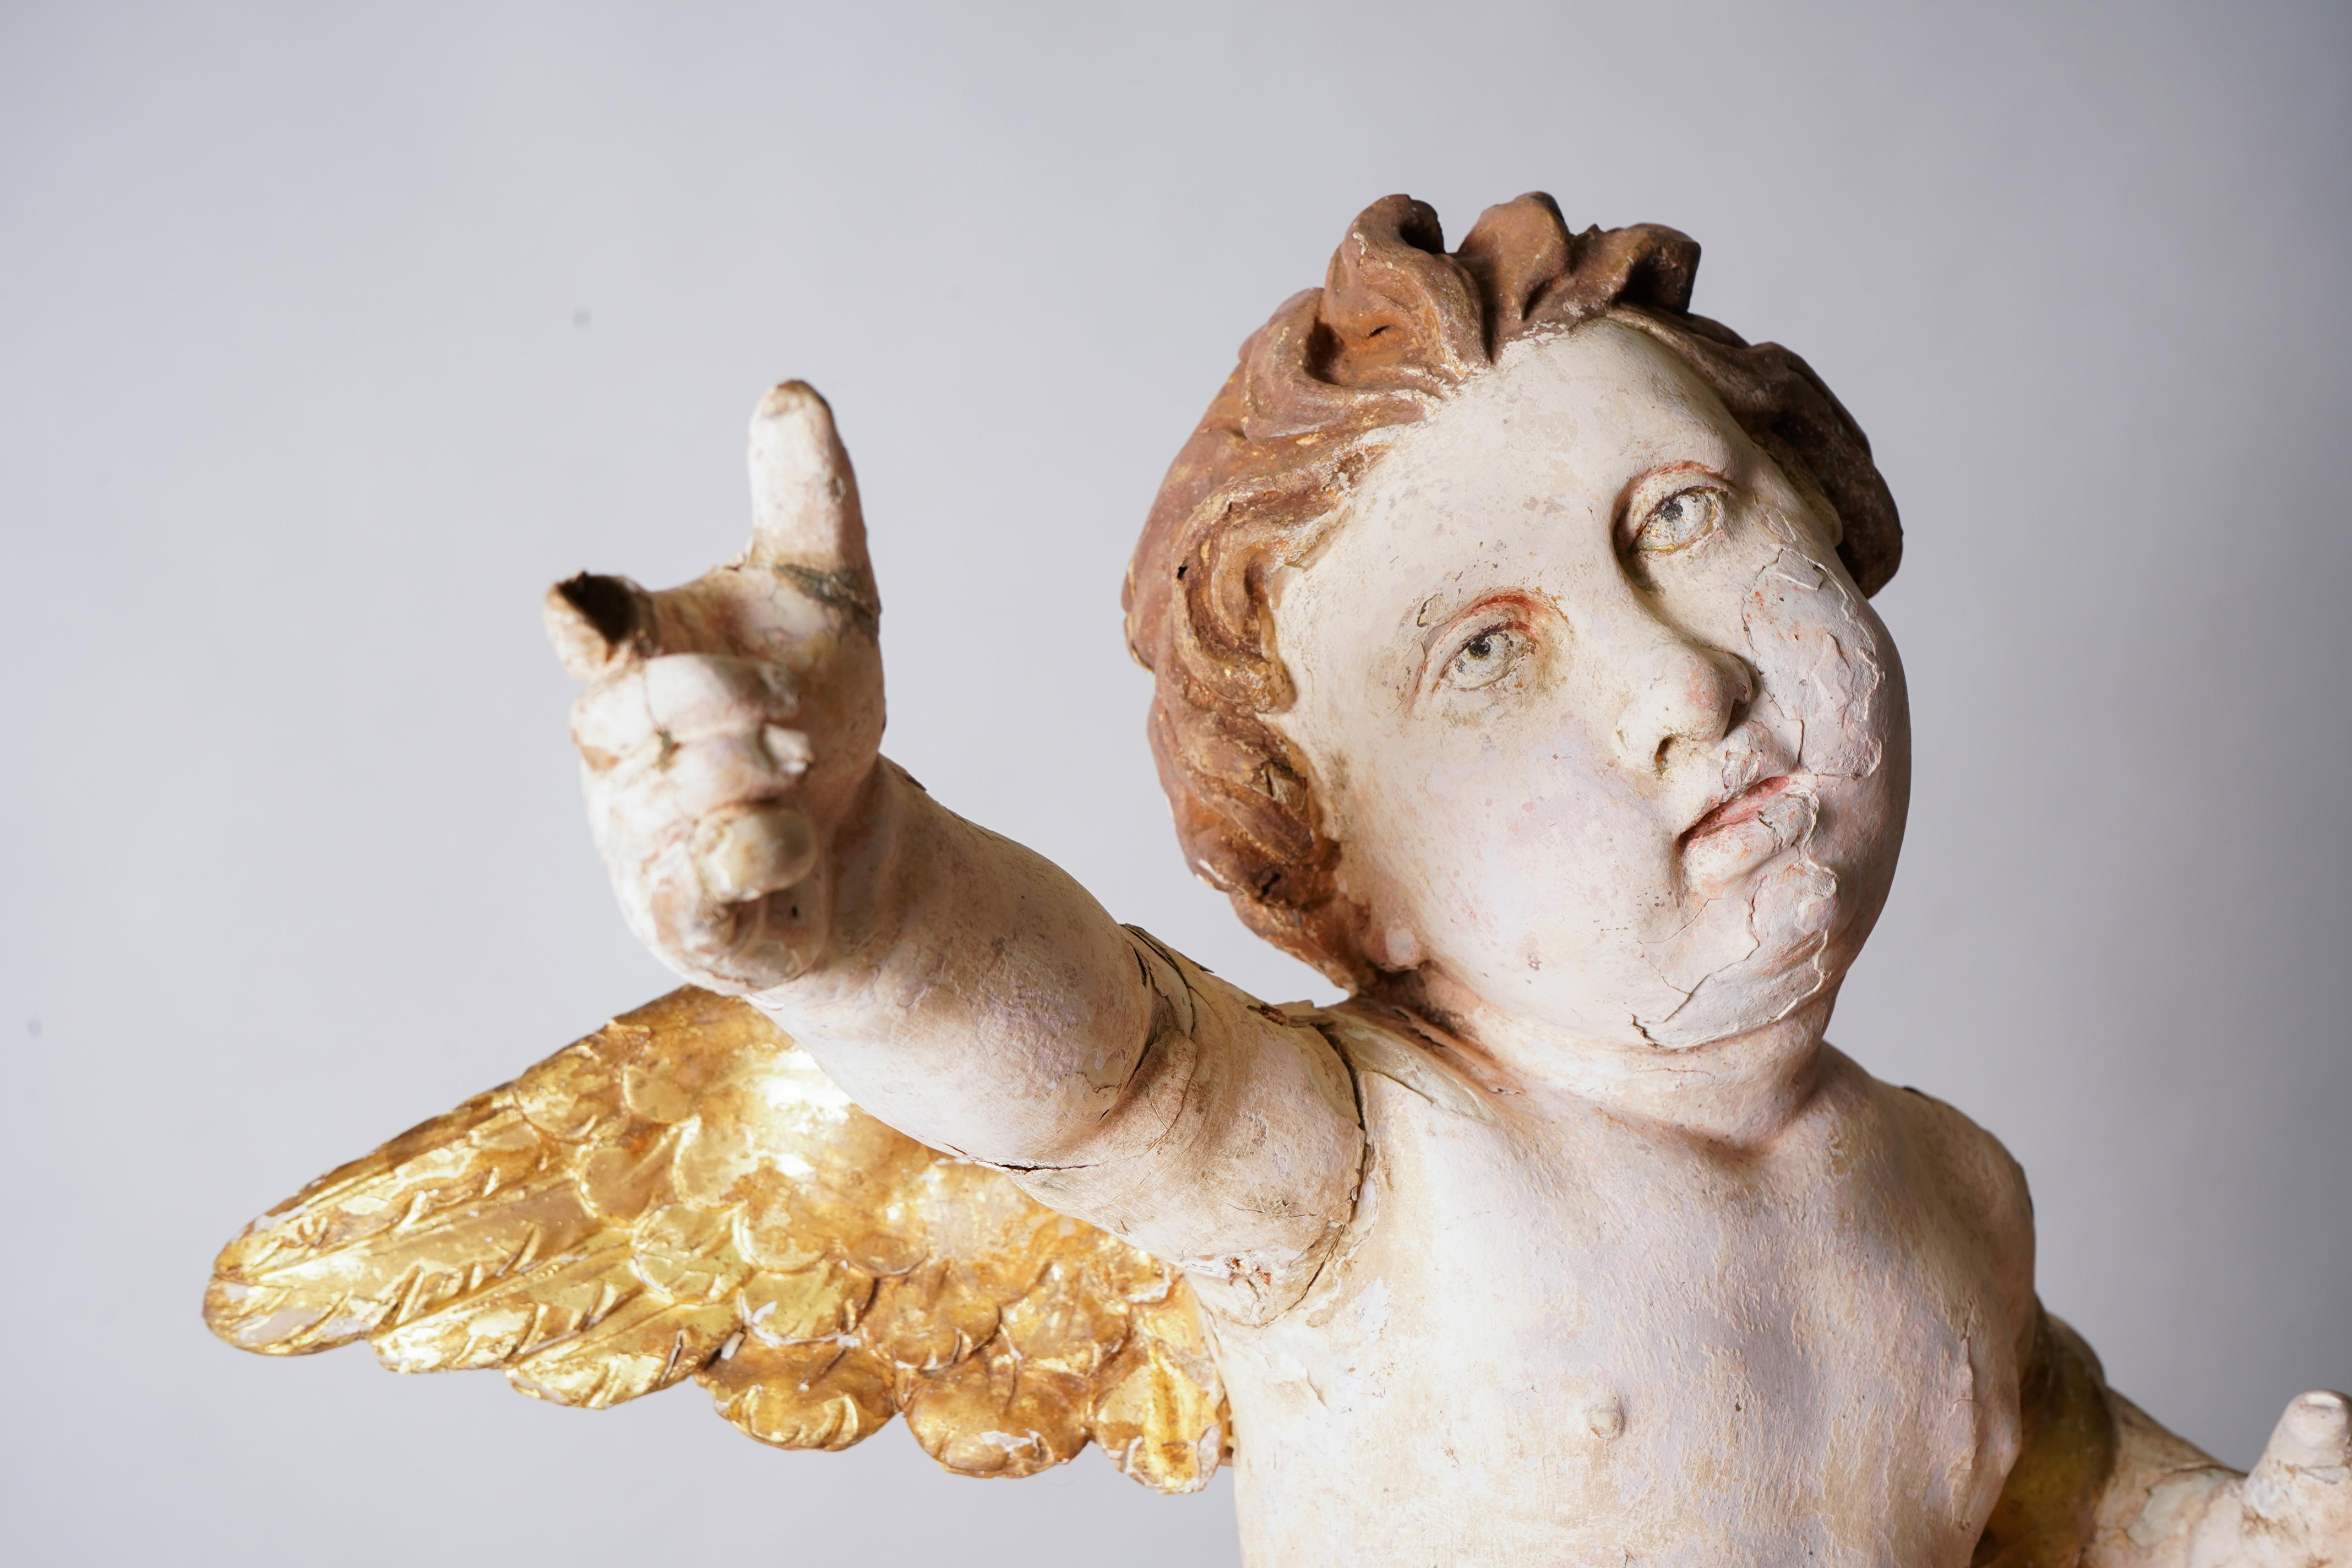 An Italian cherub, carved from linden wood wood. This graceful and exceptionally well-carved figure was likely part of an altar ensemble. The eyes and face are particularly well-formed and have a subtly plaintive expression. The wings are covered in